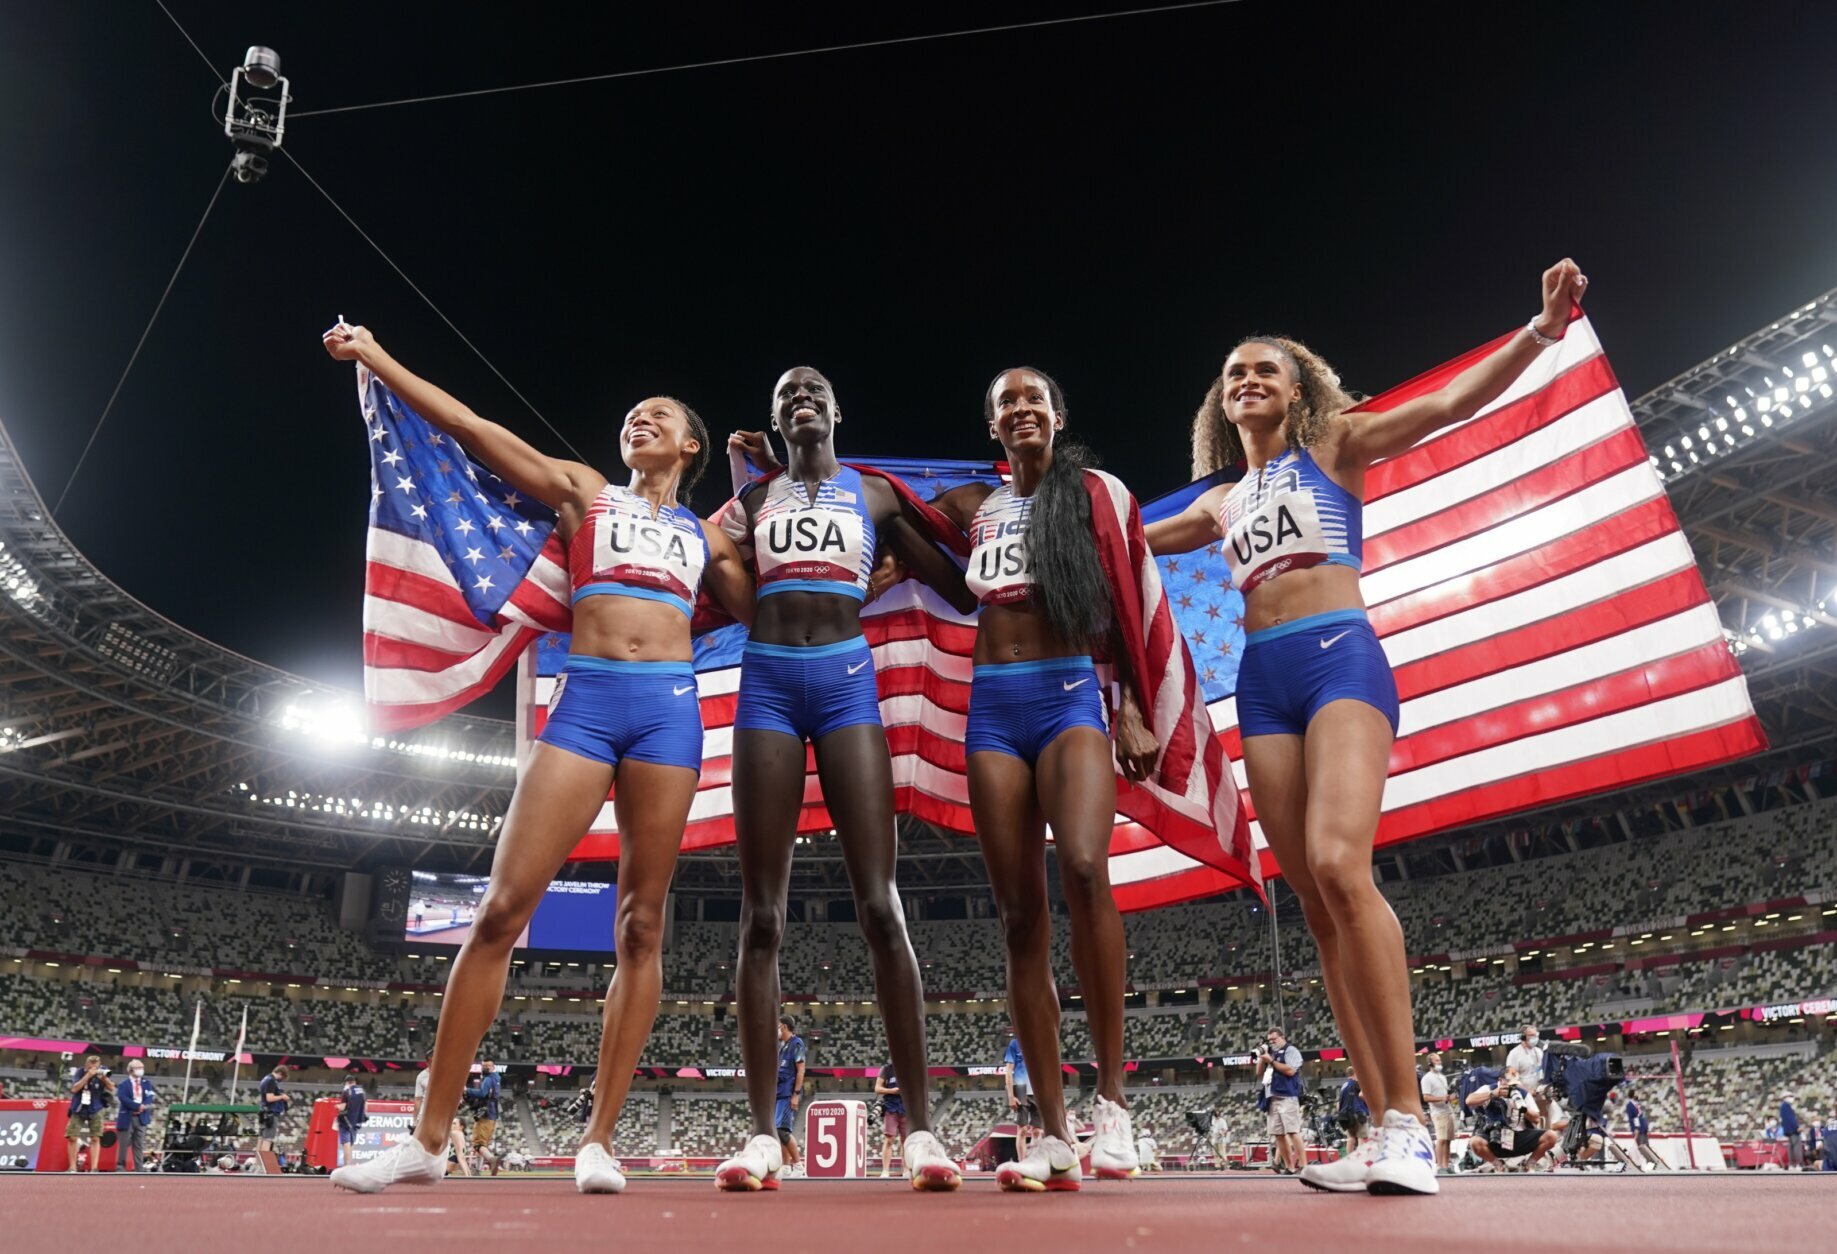 The United States team of Allyson Felix, Athing Mu, Dalilah Muhammad and Sydney Mclaughlin, from left, celebrate winning the gold medal in the final of the women's 4 x 400-meter relay at the 2020 Summer Olympics, Saturday, Aug. 7, 2021, in Tokyo, Japan. (AP Photo/Charlie Riedel)